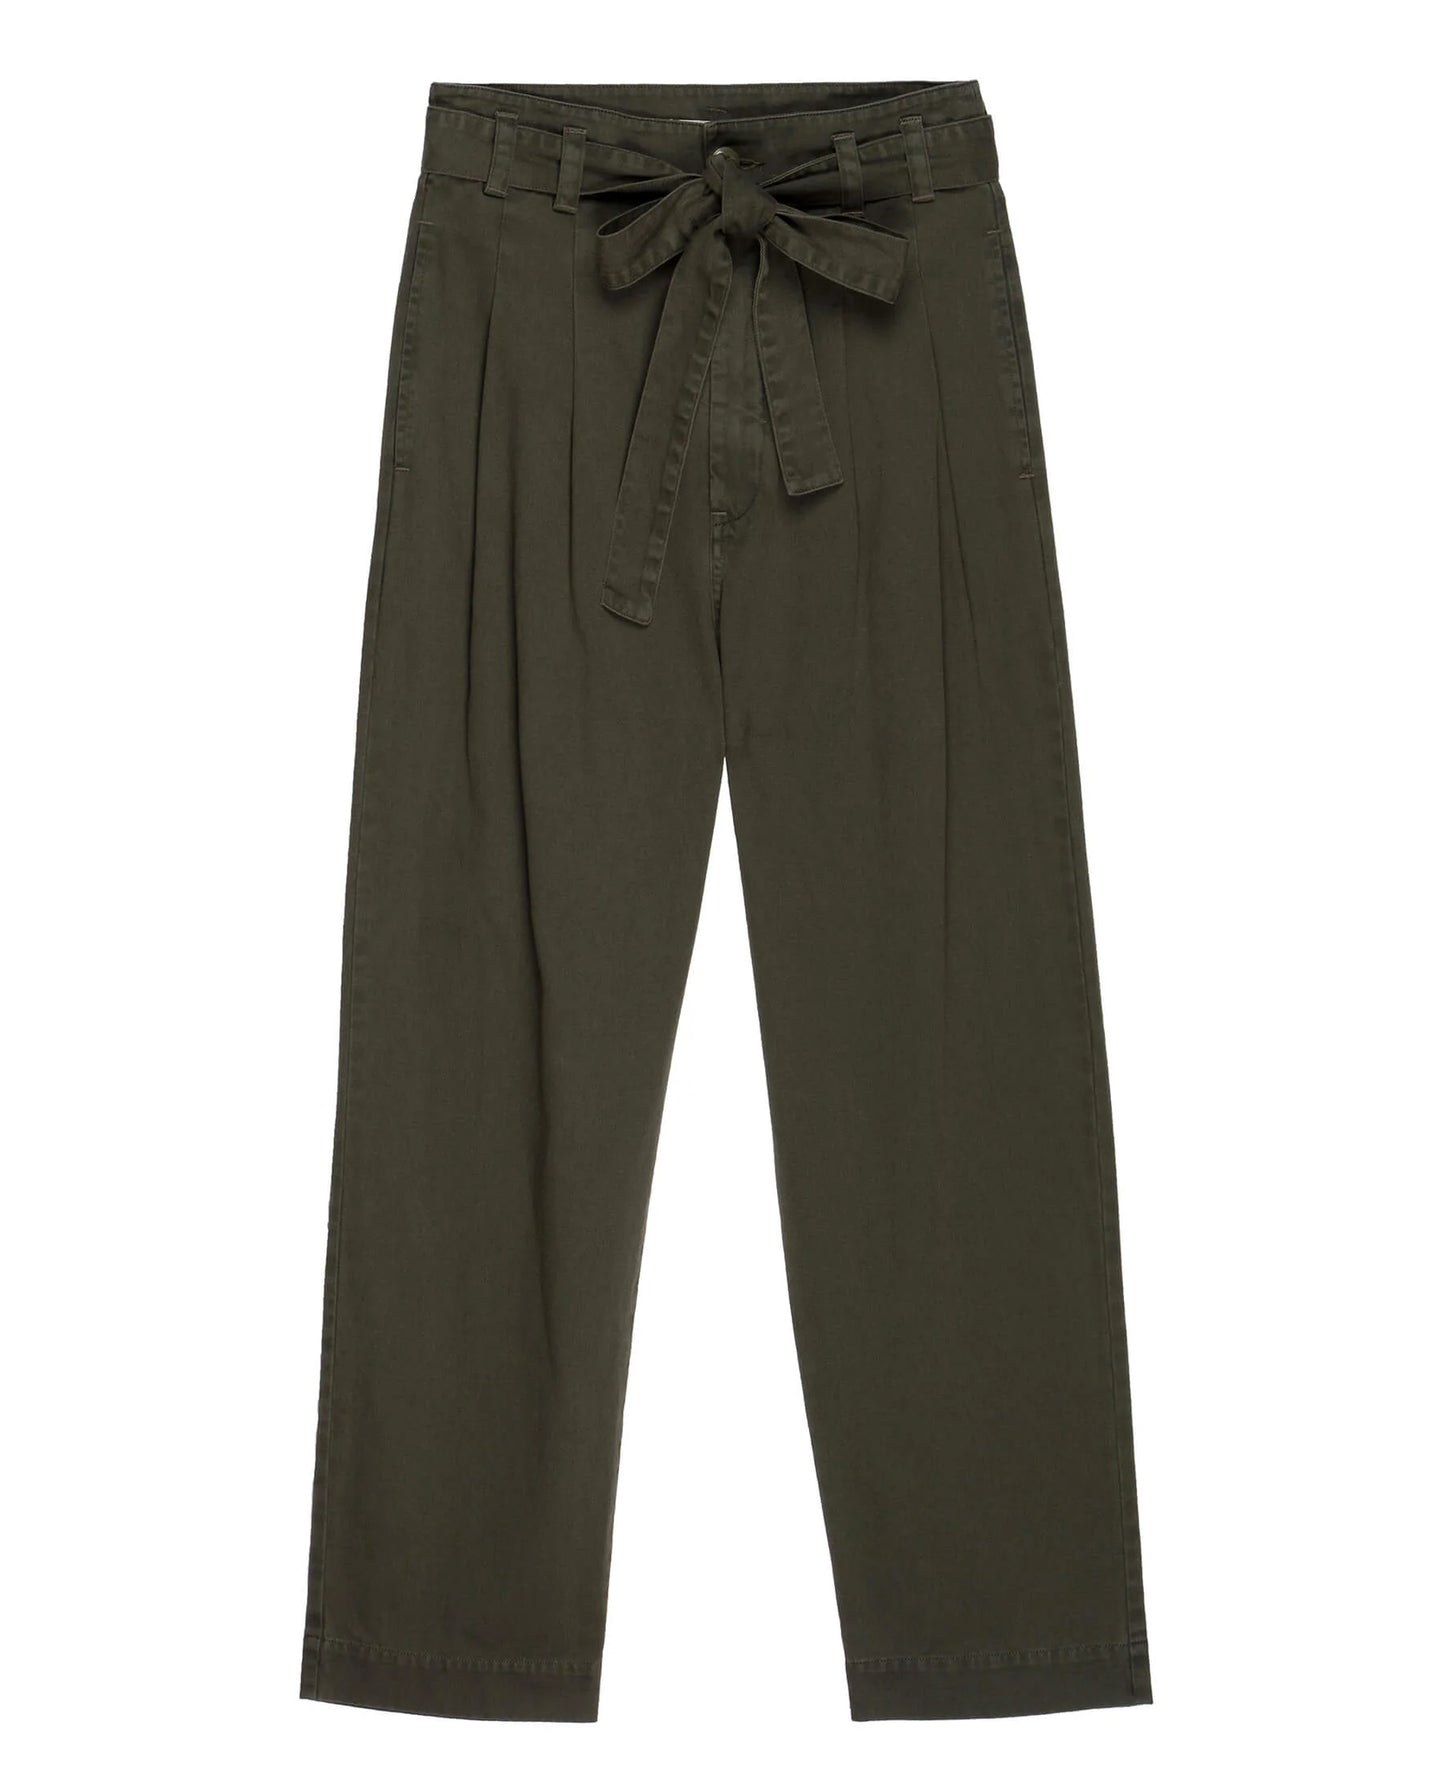 The Statesman Trouser Pants The Great.   